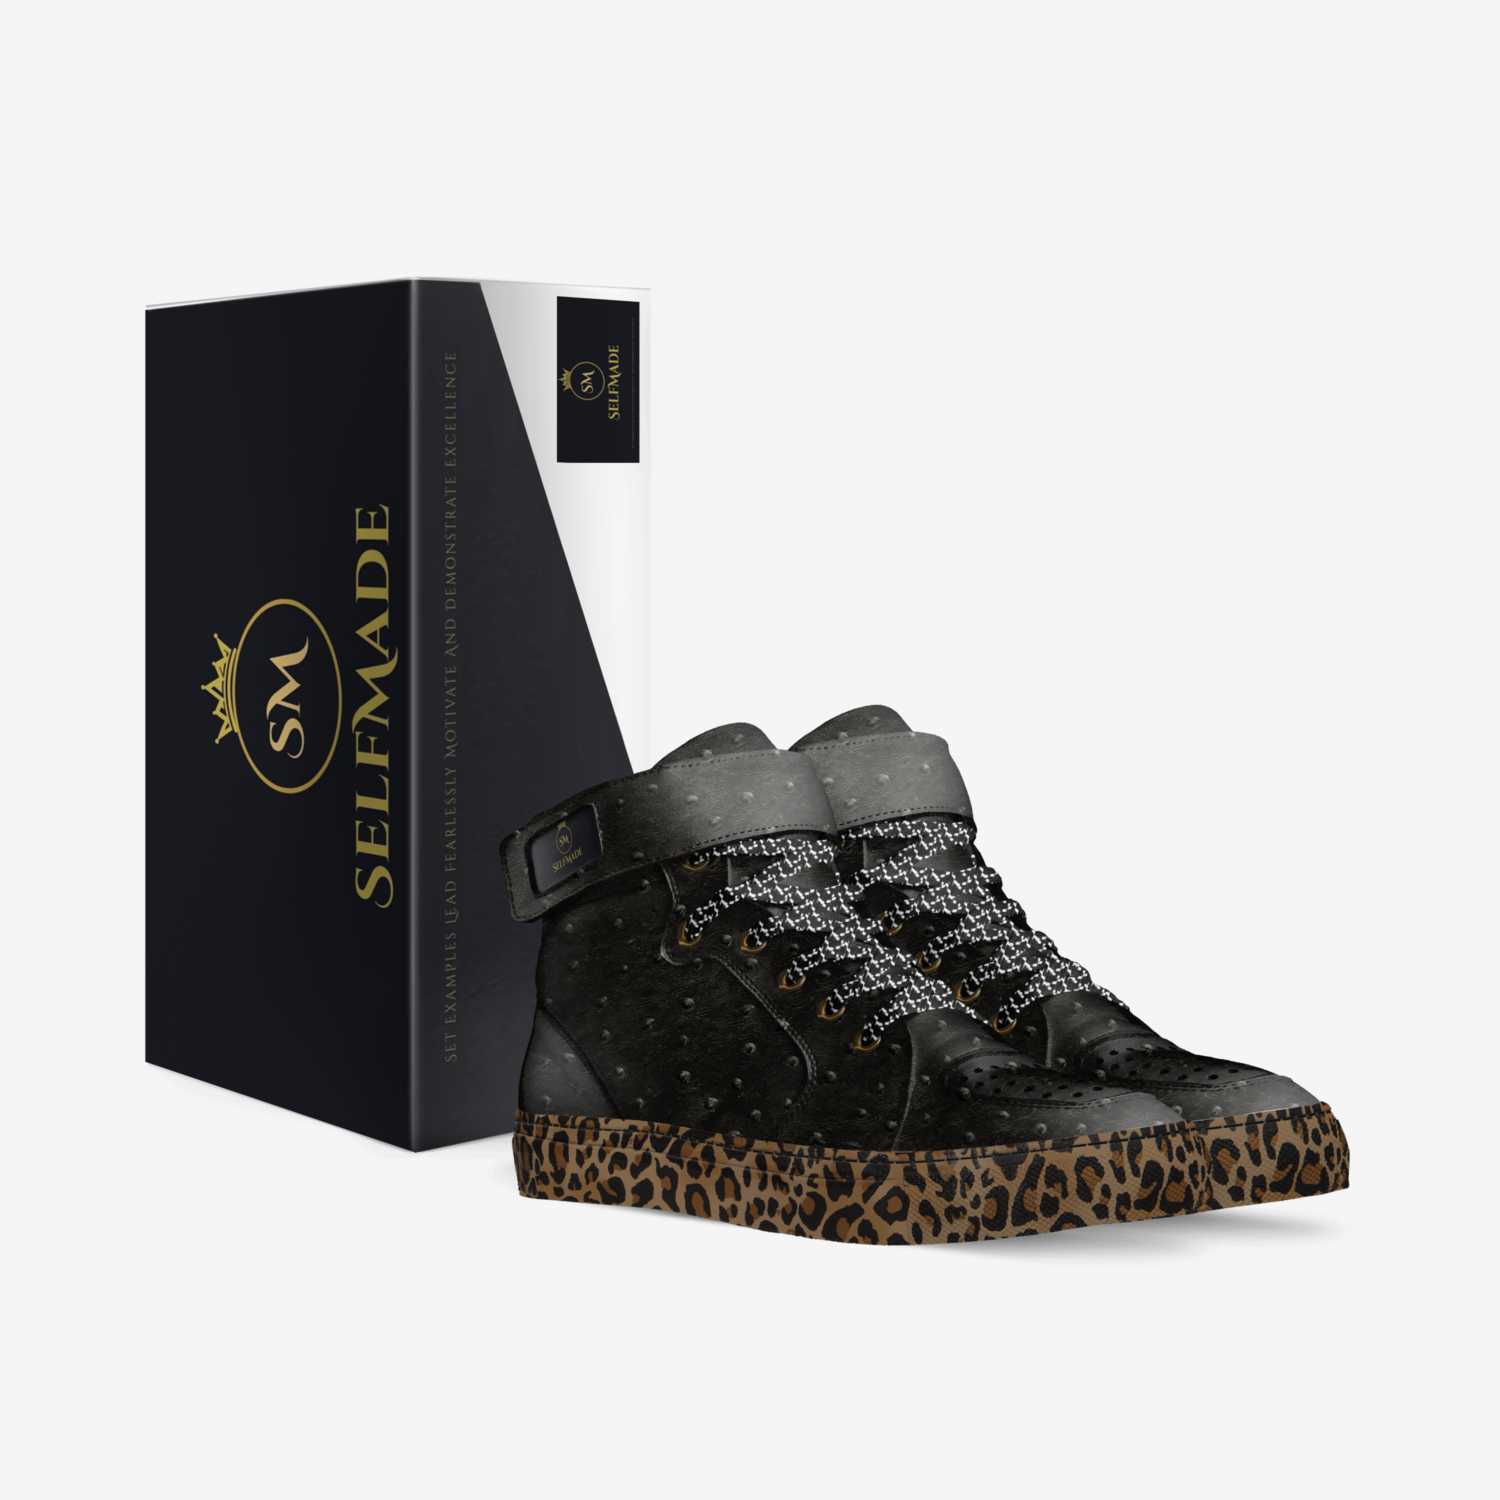 The Black Leopards custom made in Italy shoes by Brian Washington | Box view